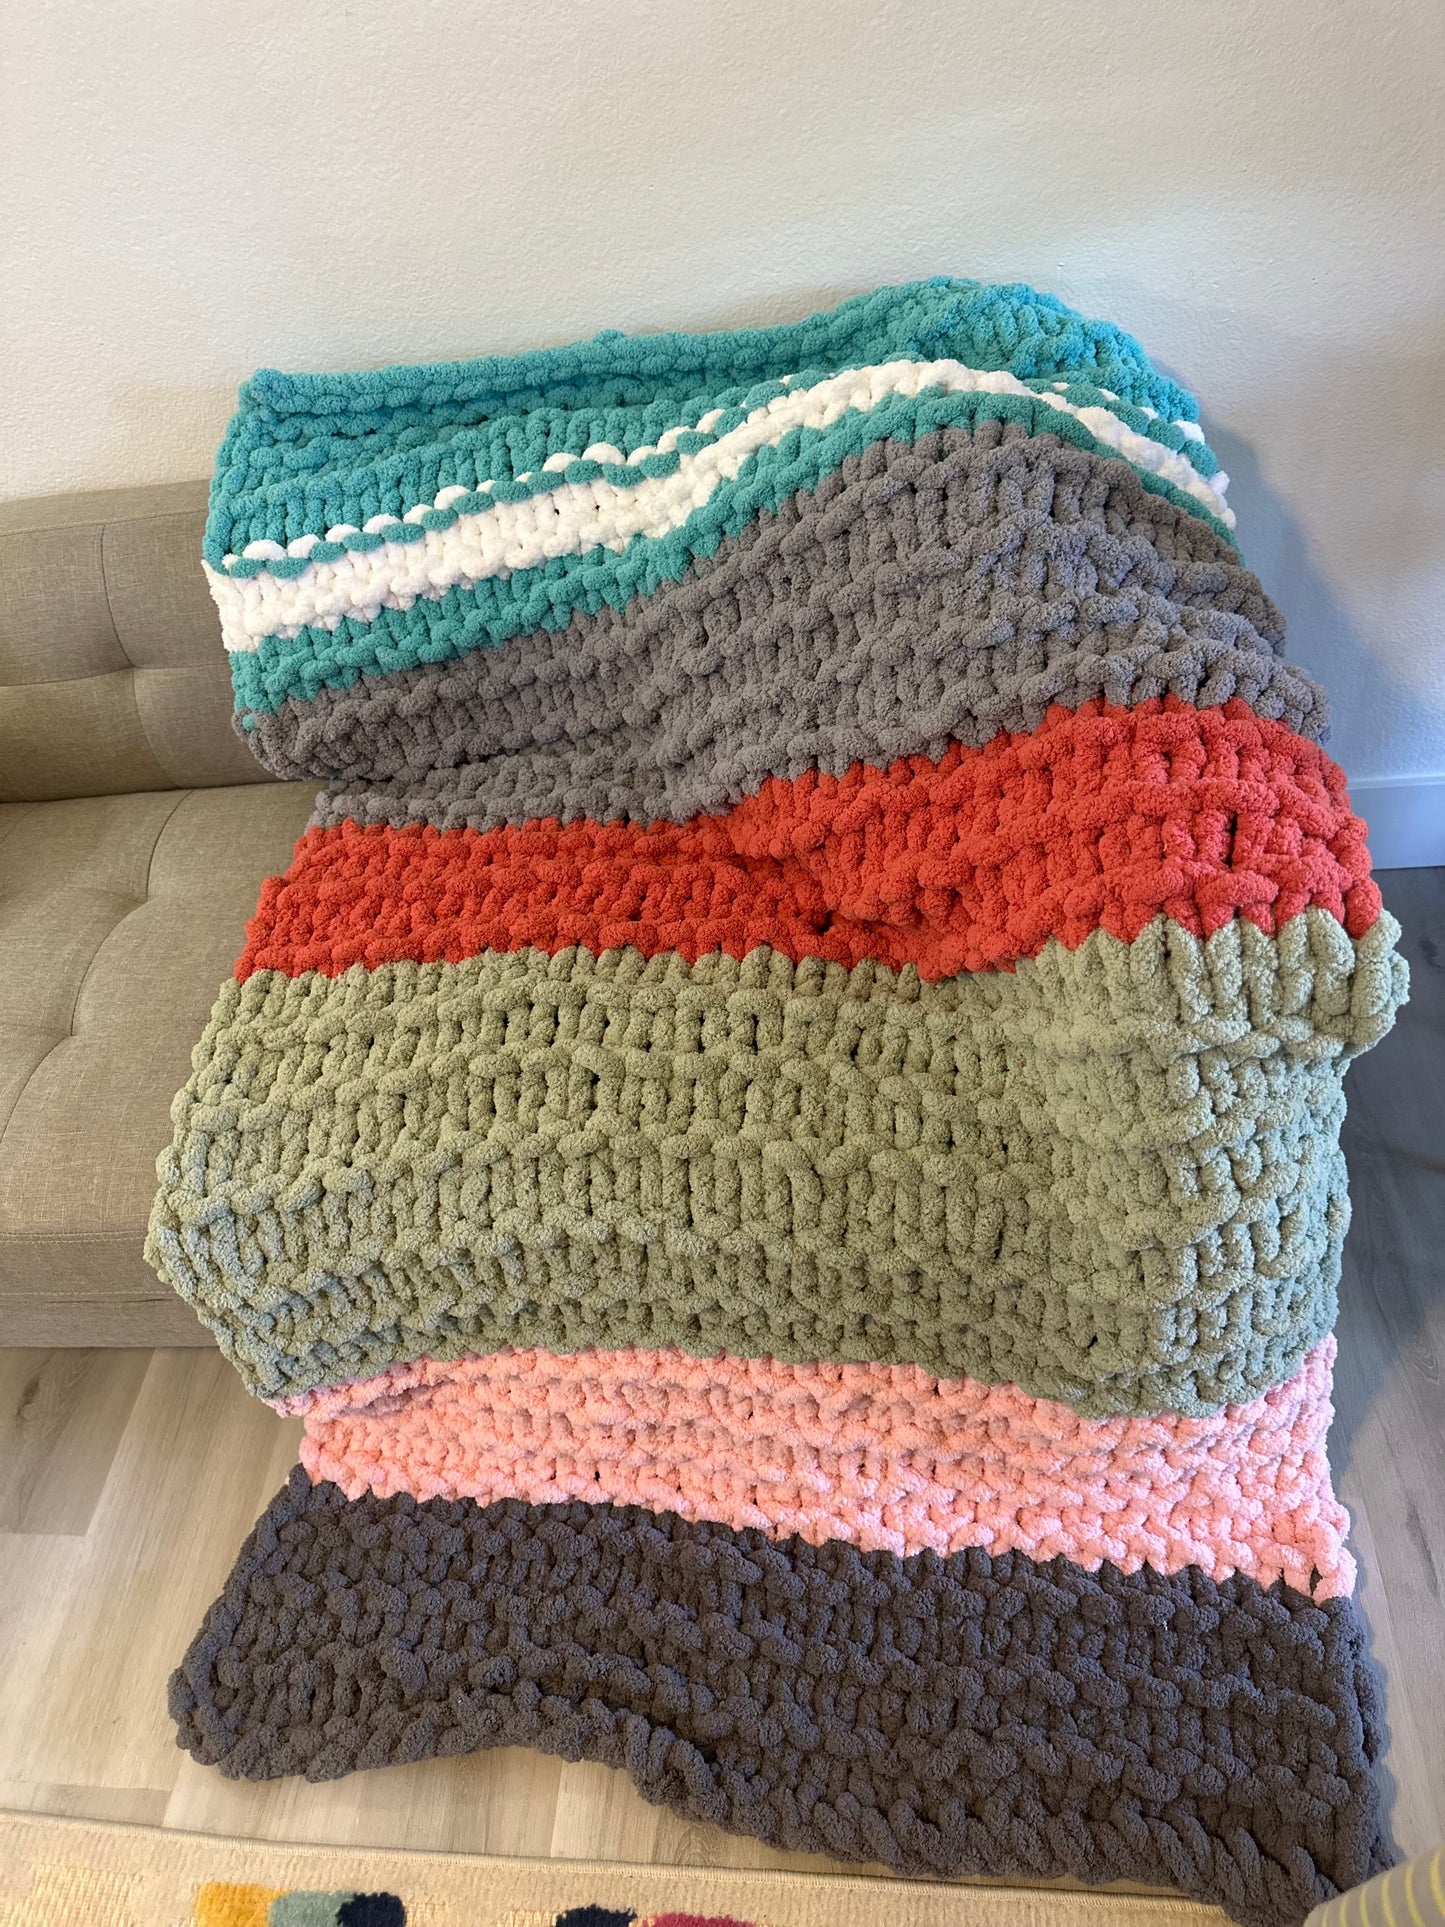 Freckled Cozy Throw Blanket